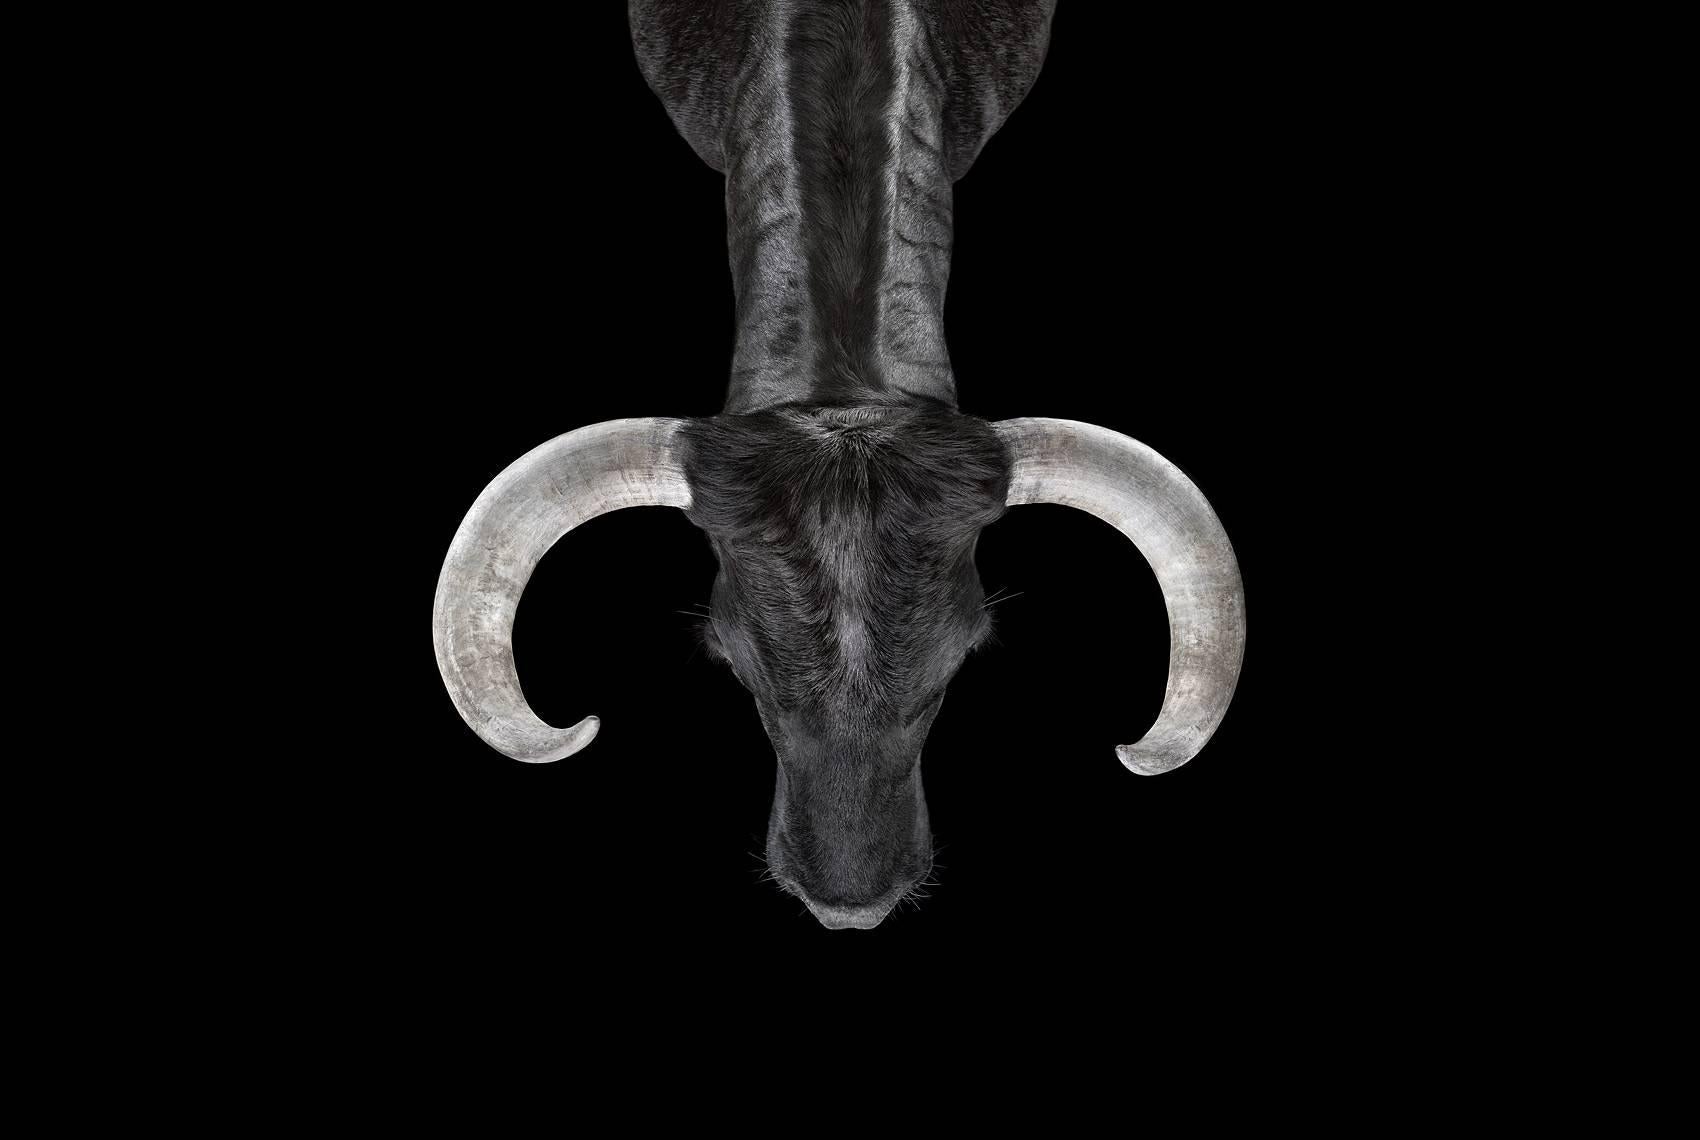 'Bull #2, Los Angeles, CA, 2011' is a limited-edition photograph by contemporary artist Brad Wilson from the ‘Affinity’ series which features studio portraits of wild animals. 

This photograph is sold unframed as a print only. It is available in 4